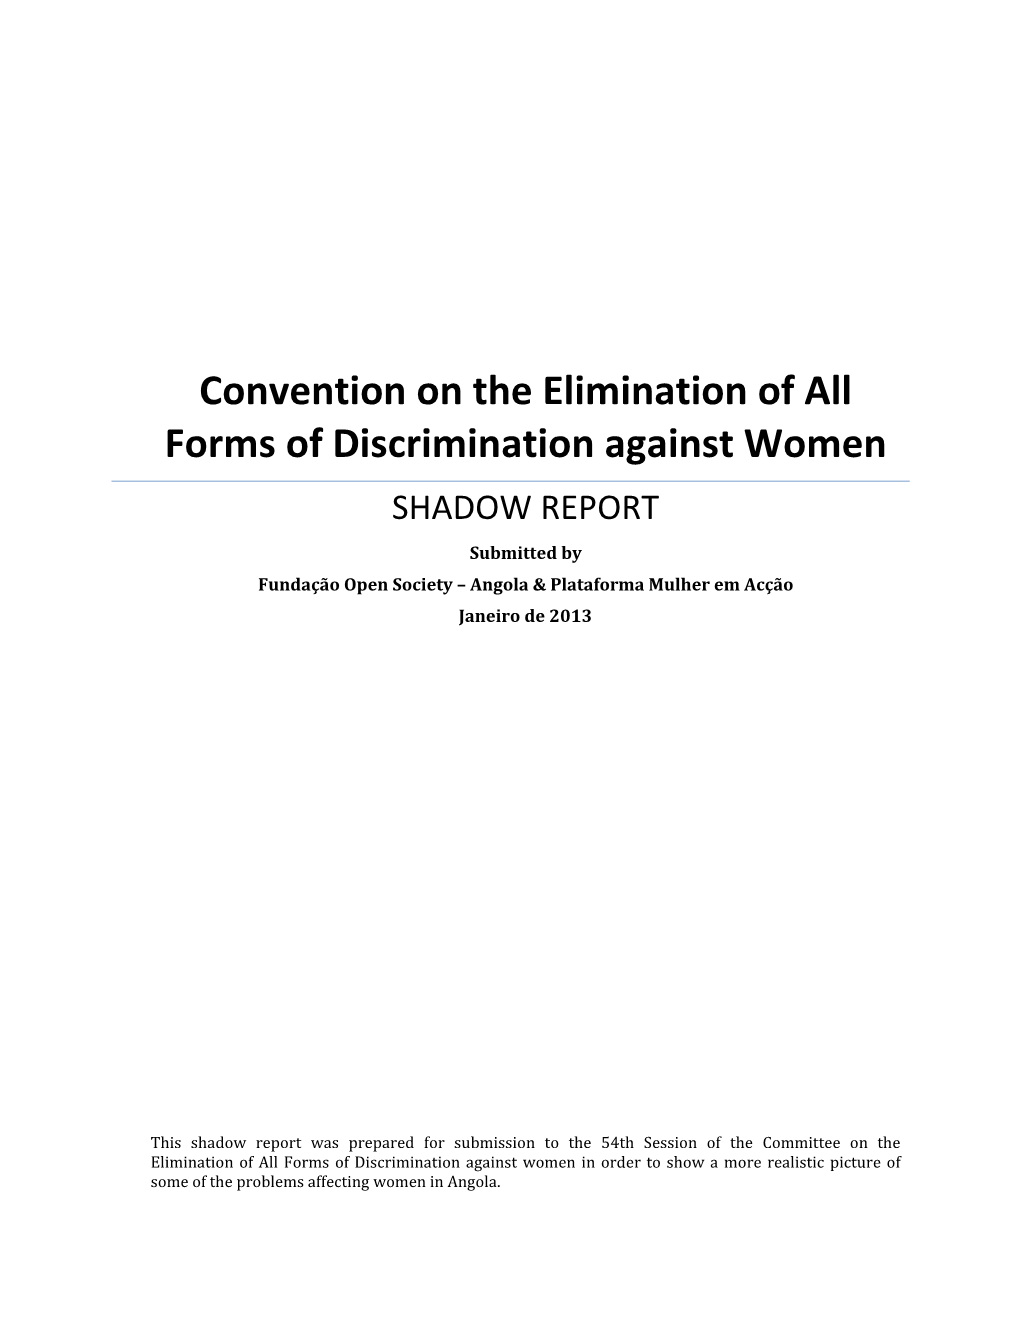 Convention on the Elimination of All Forms of Discrimination Against Women